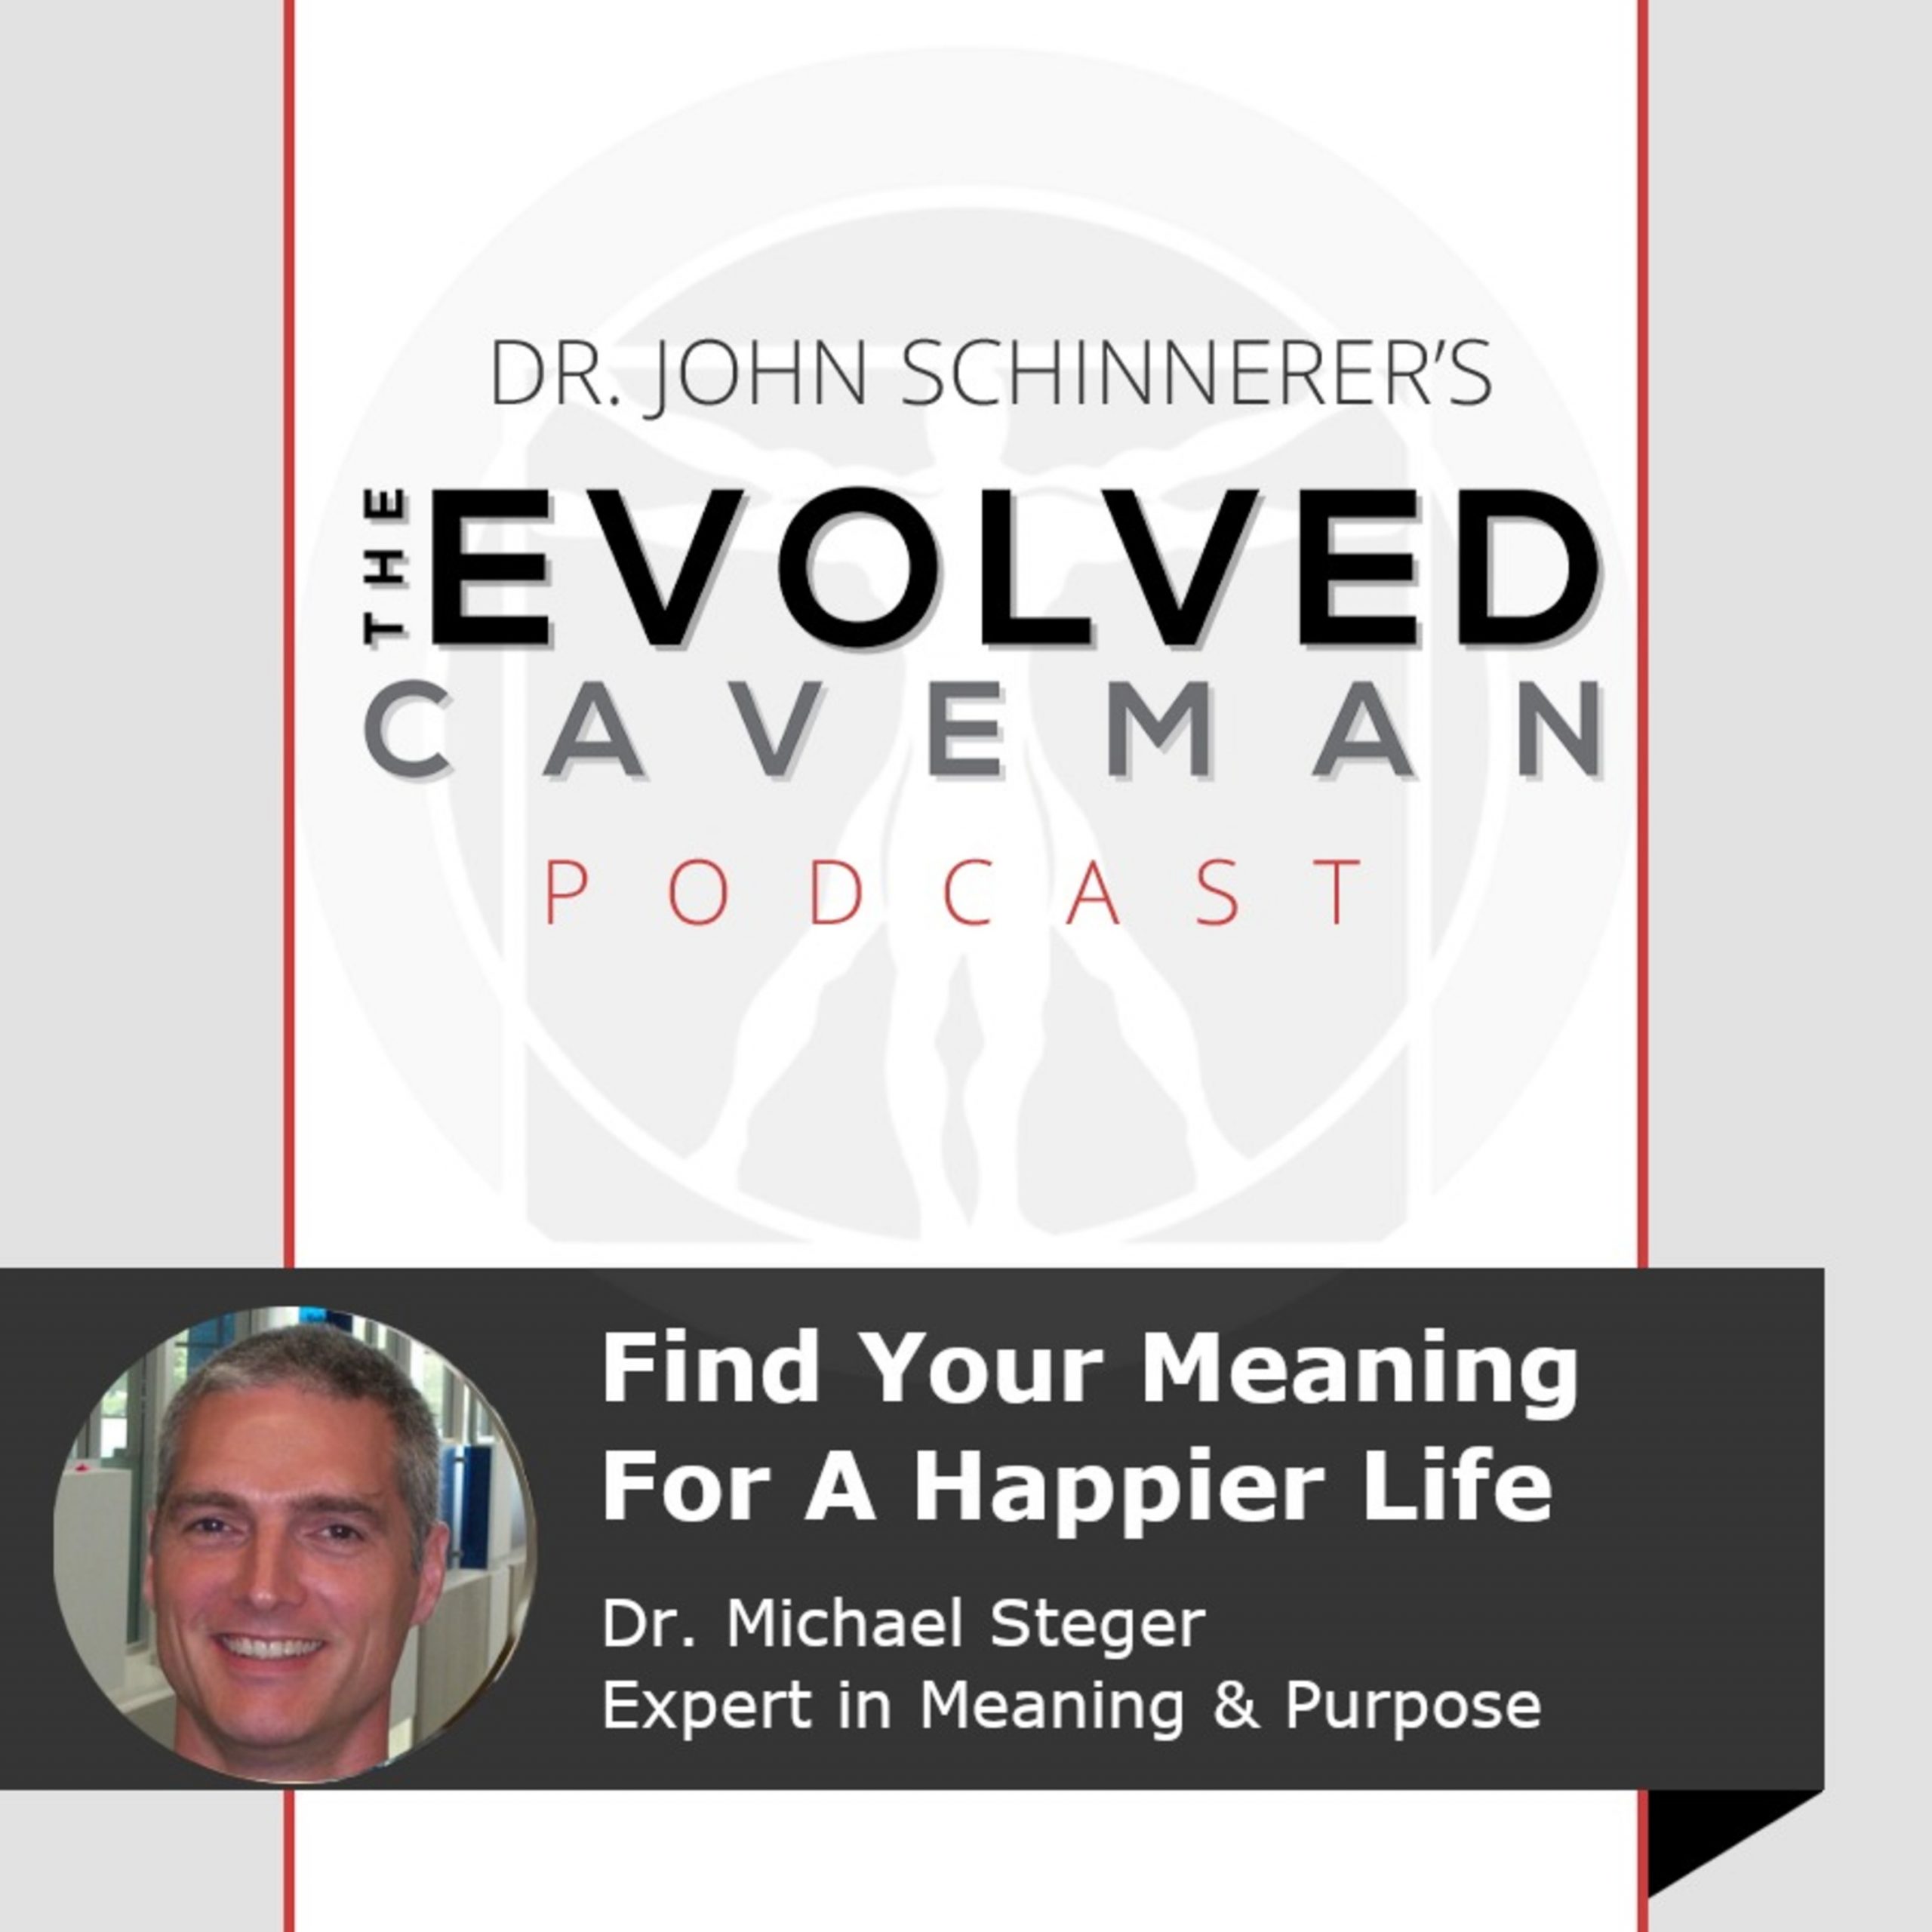 Discover The Meaning In Your Life with Dr. Michael Steger